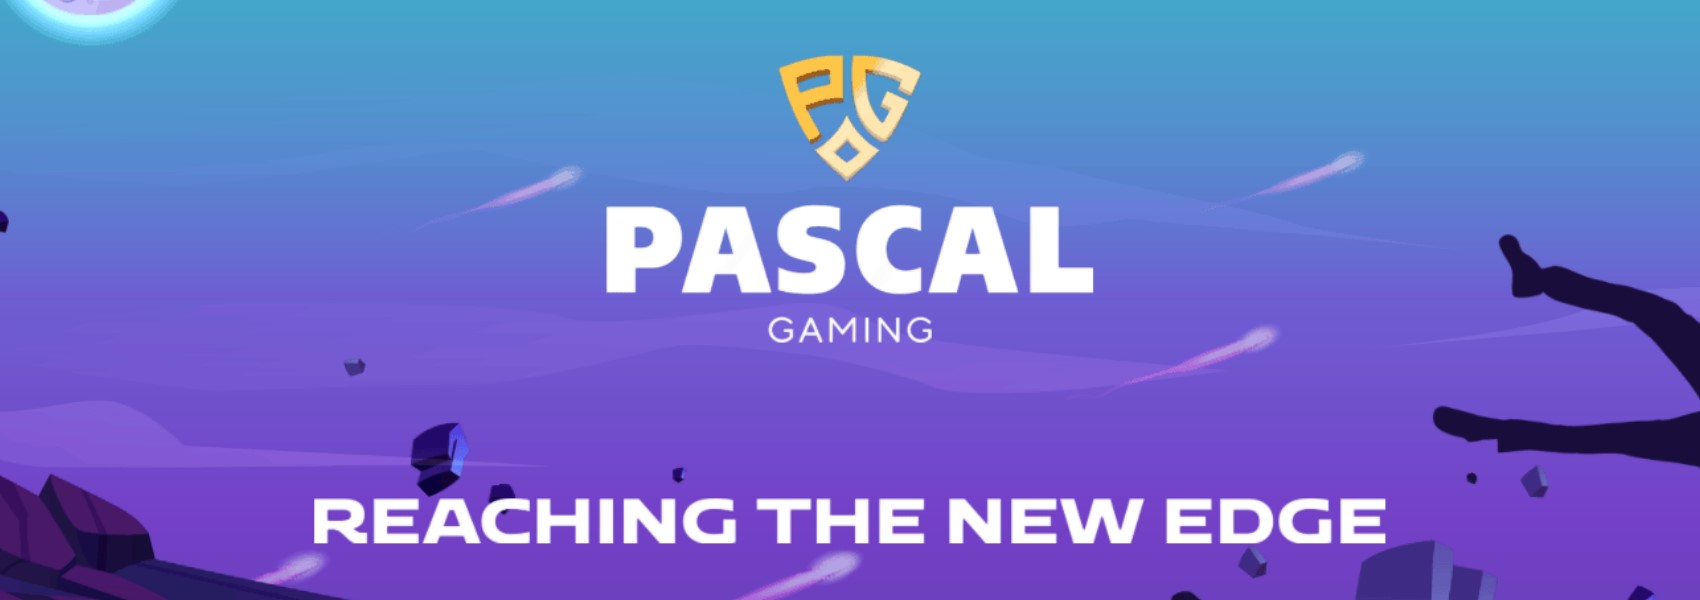 Pascal Gaming-Spieleanbieter